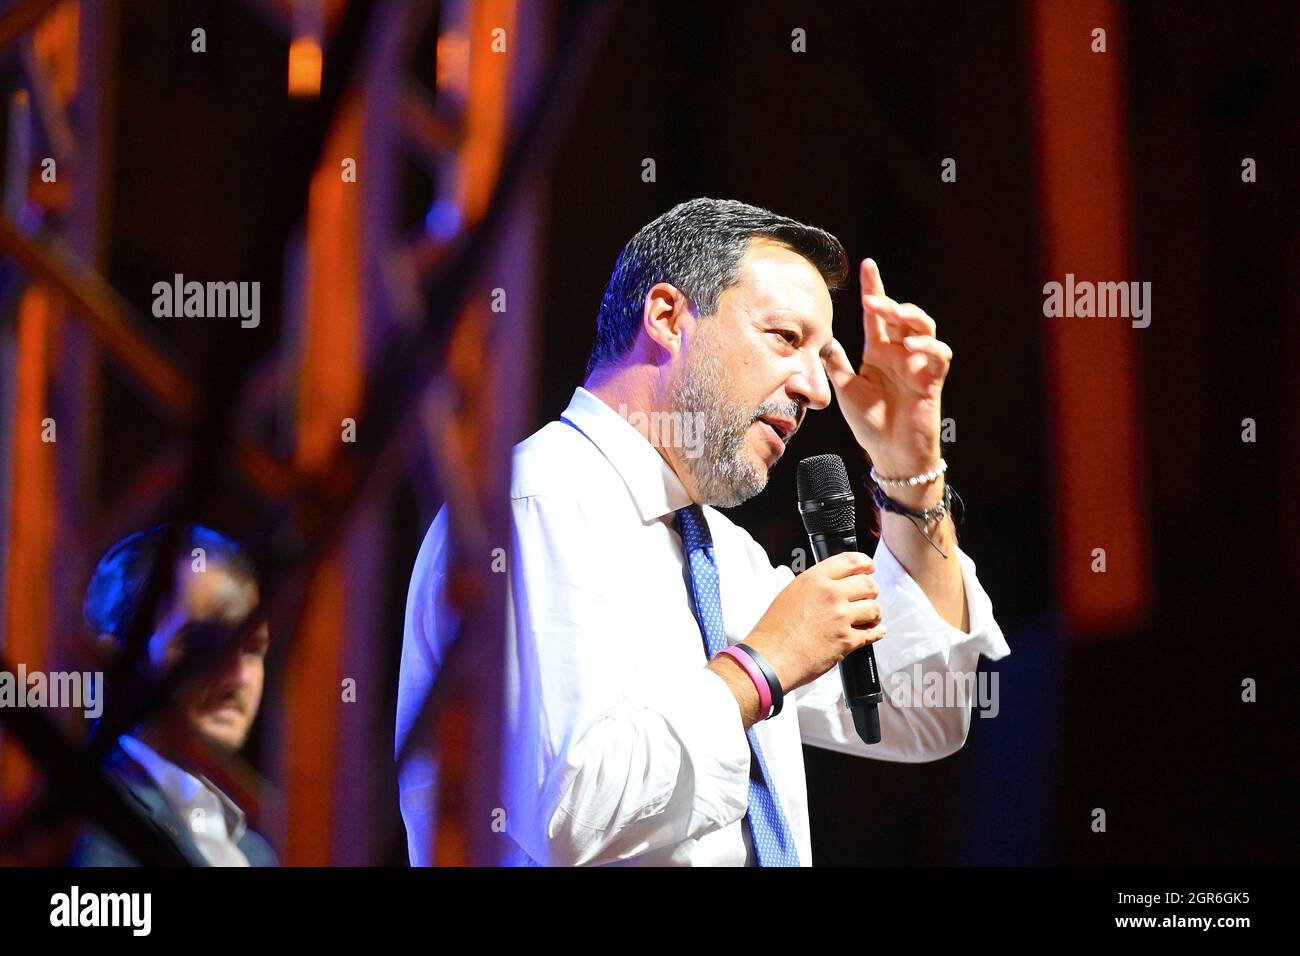 TORINO, ITALY - Sep 10, 2021: A shallow focus of Matteo Salvini, leader of Lega Italian party during election rally Turin Italy Stock Photo